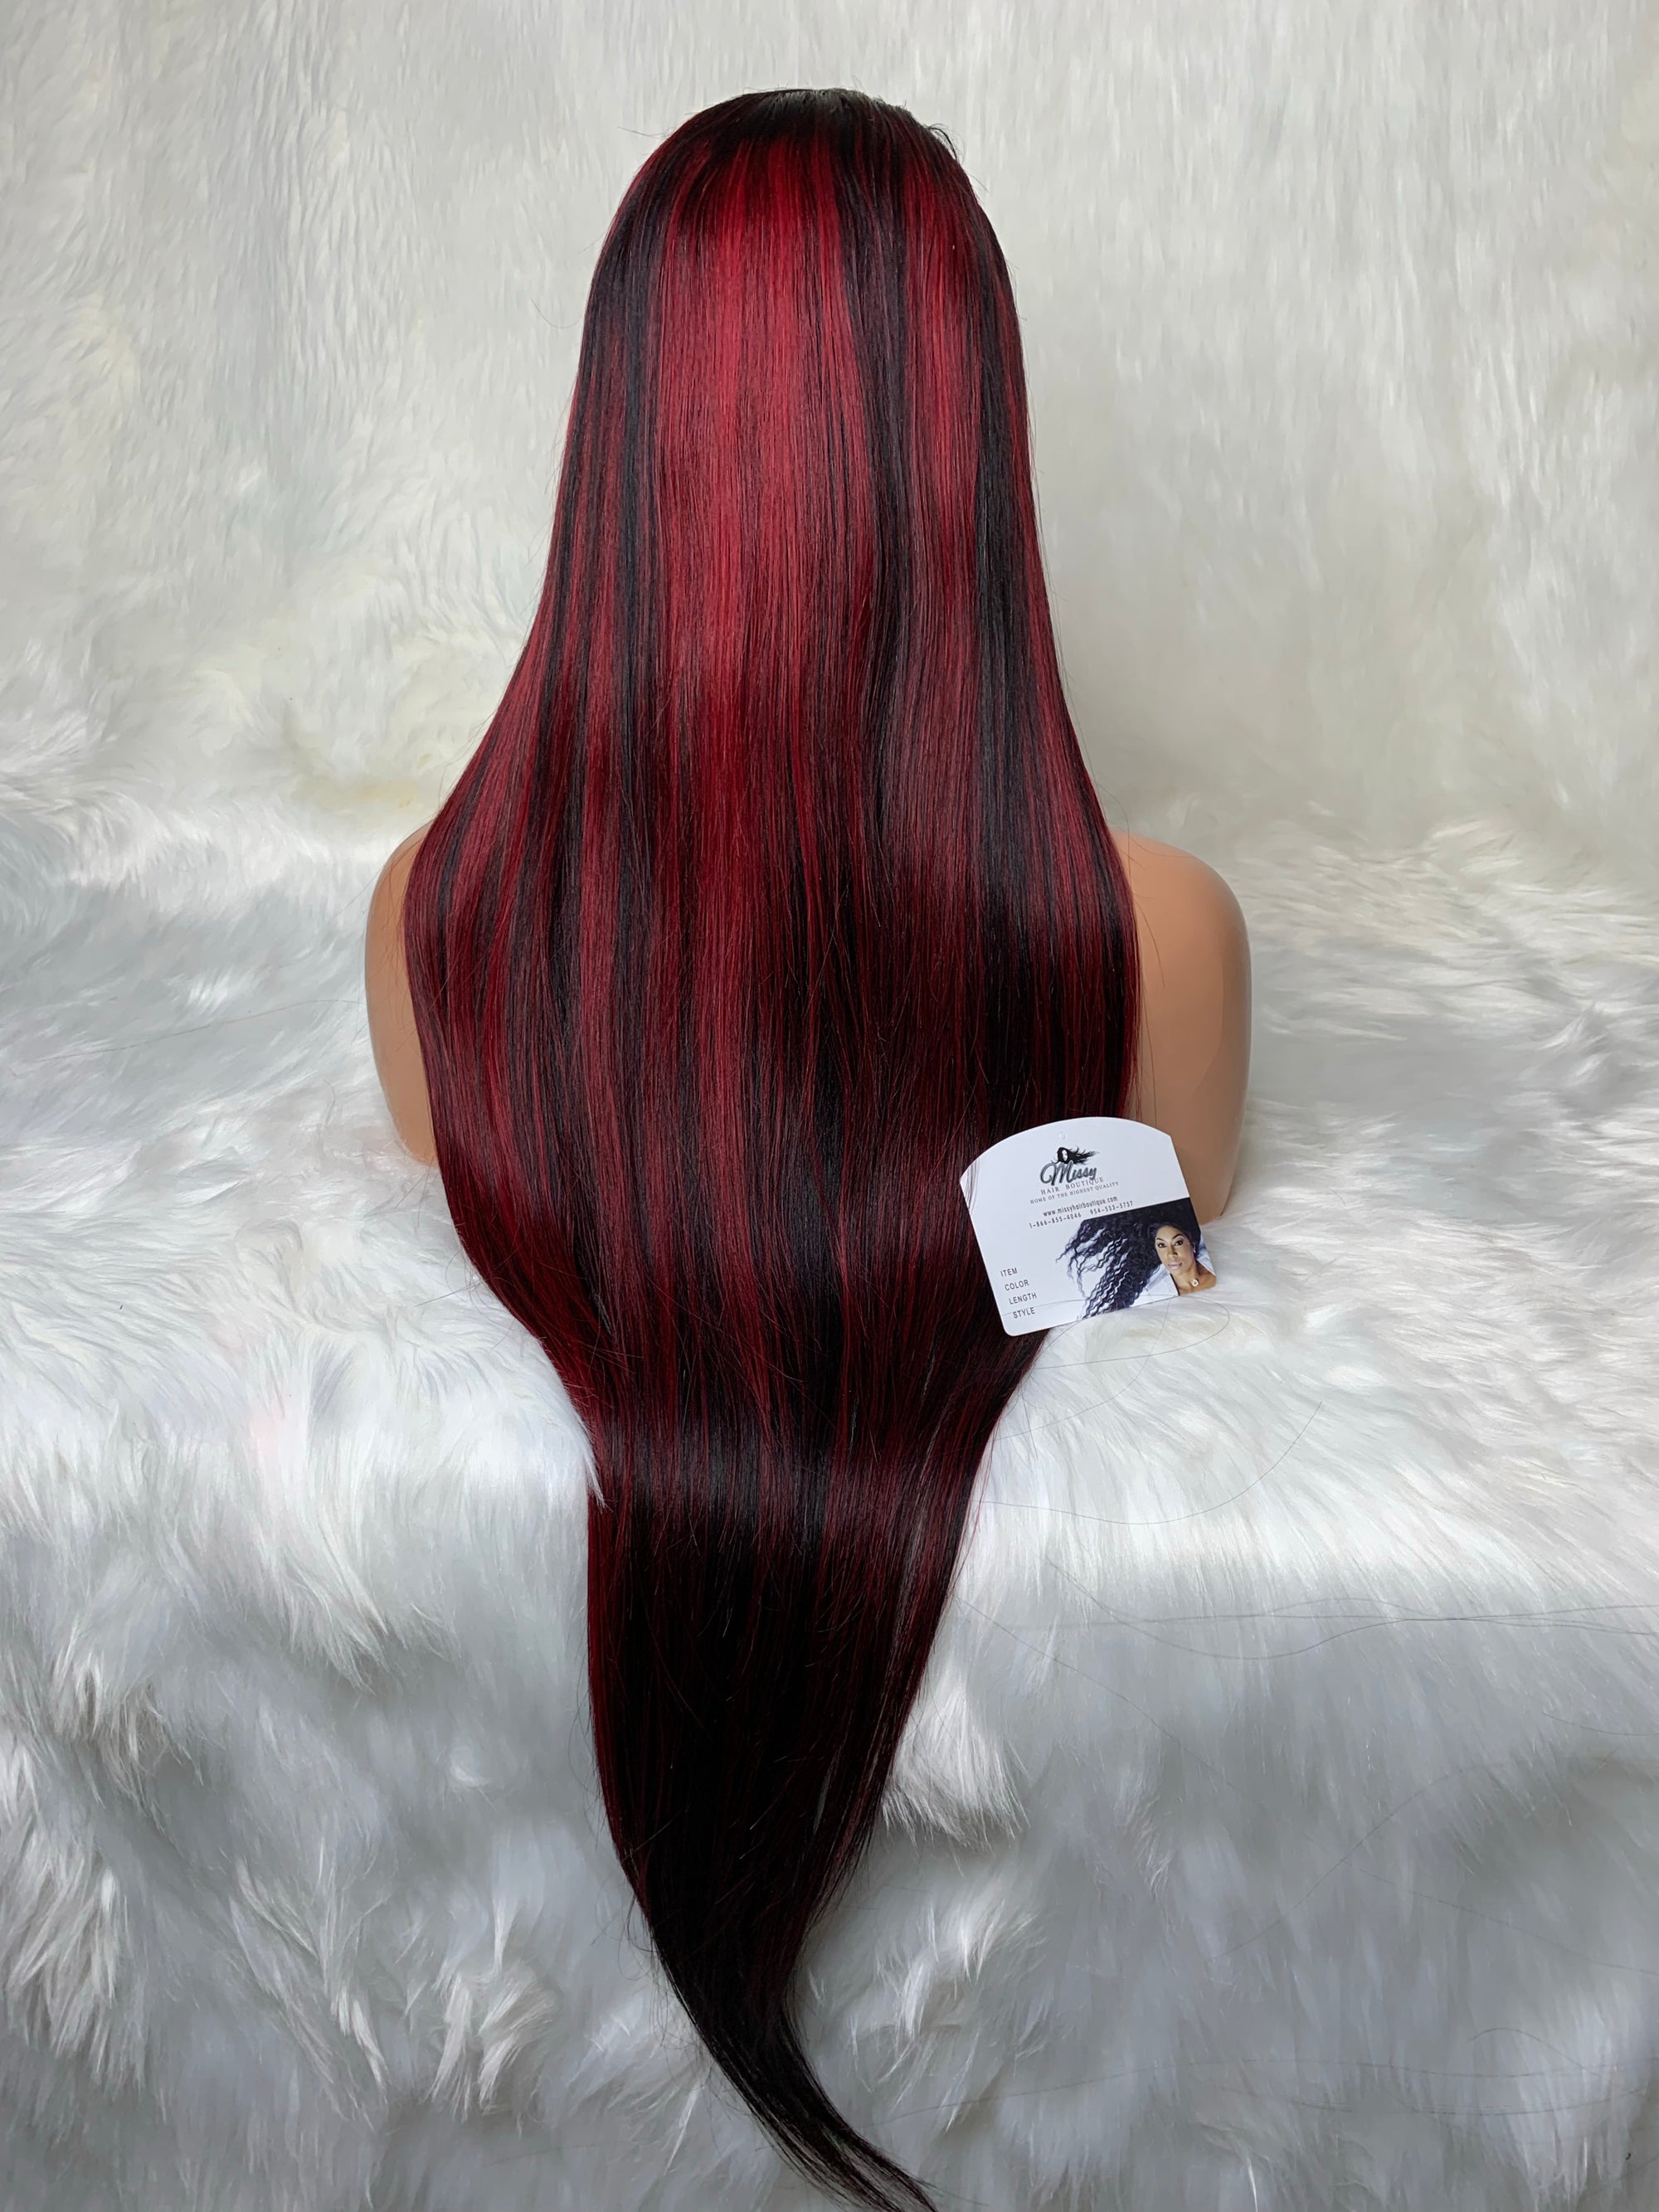 🆕 Peekaboo Red/Black  LACE Front UNIT